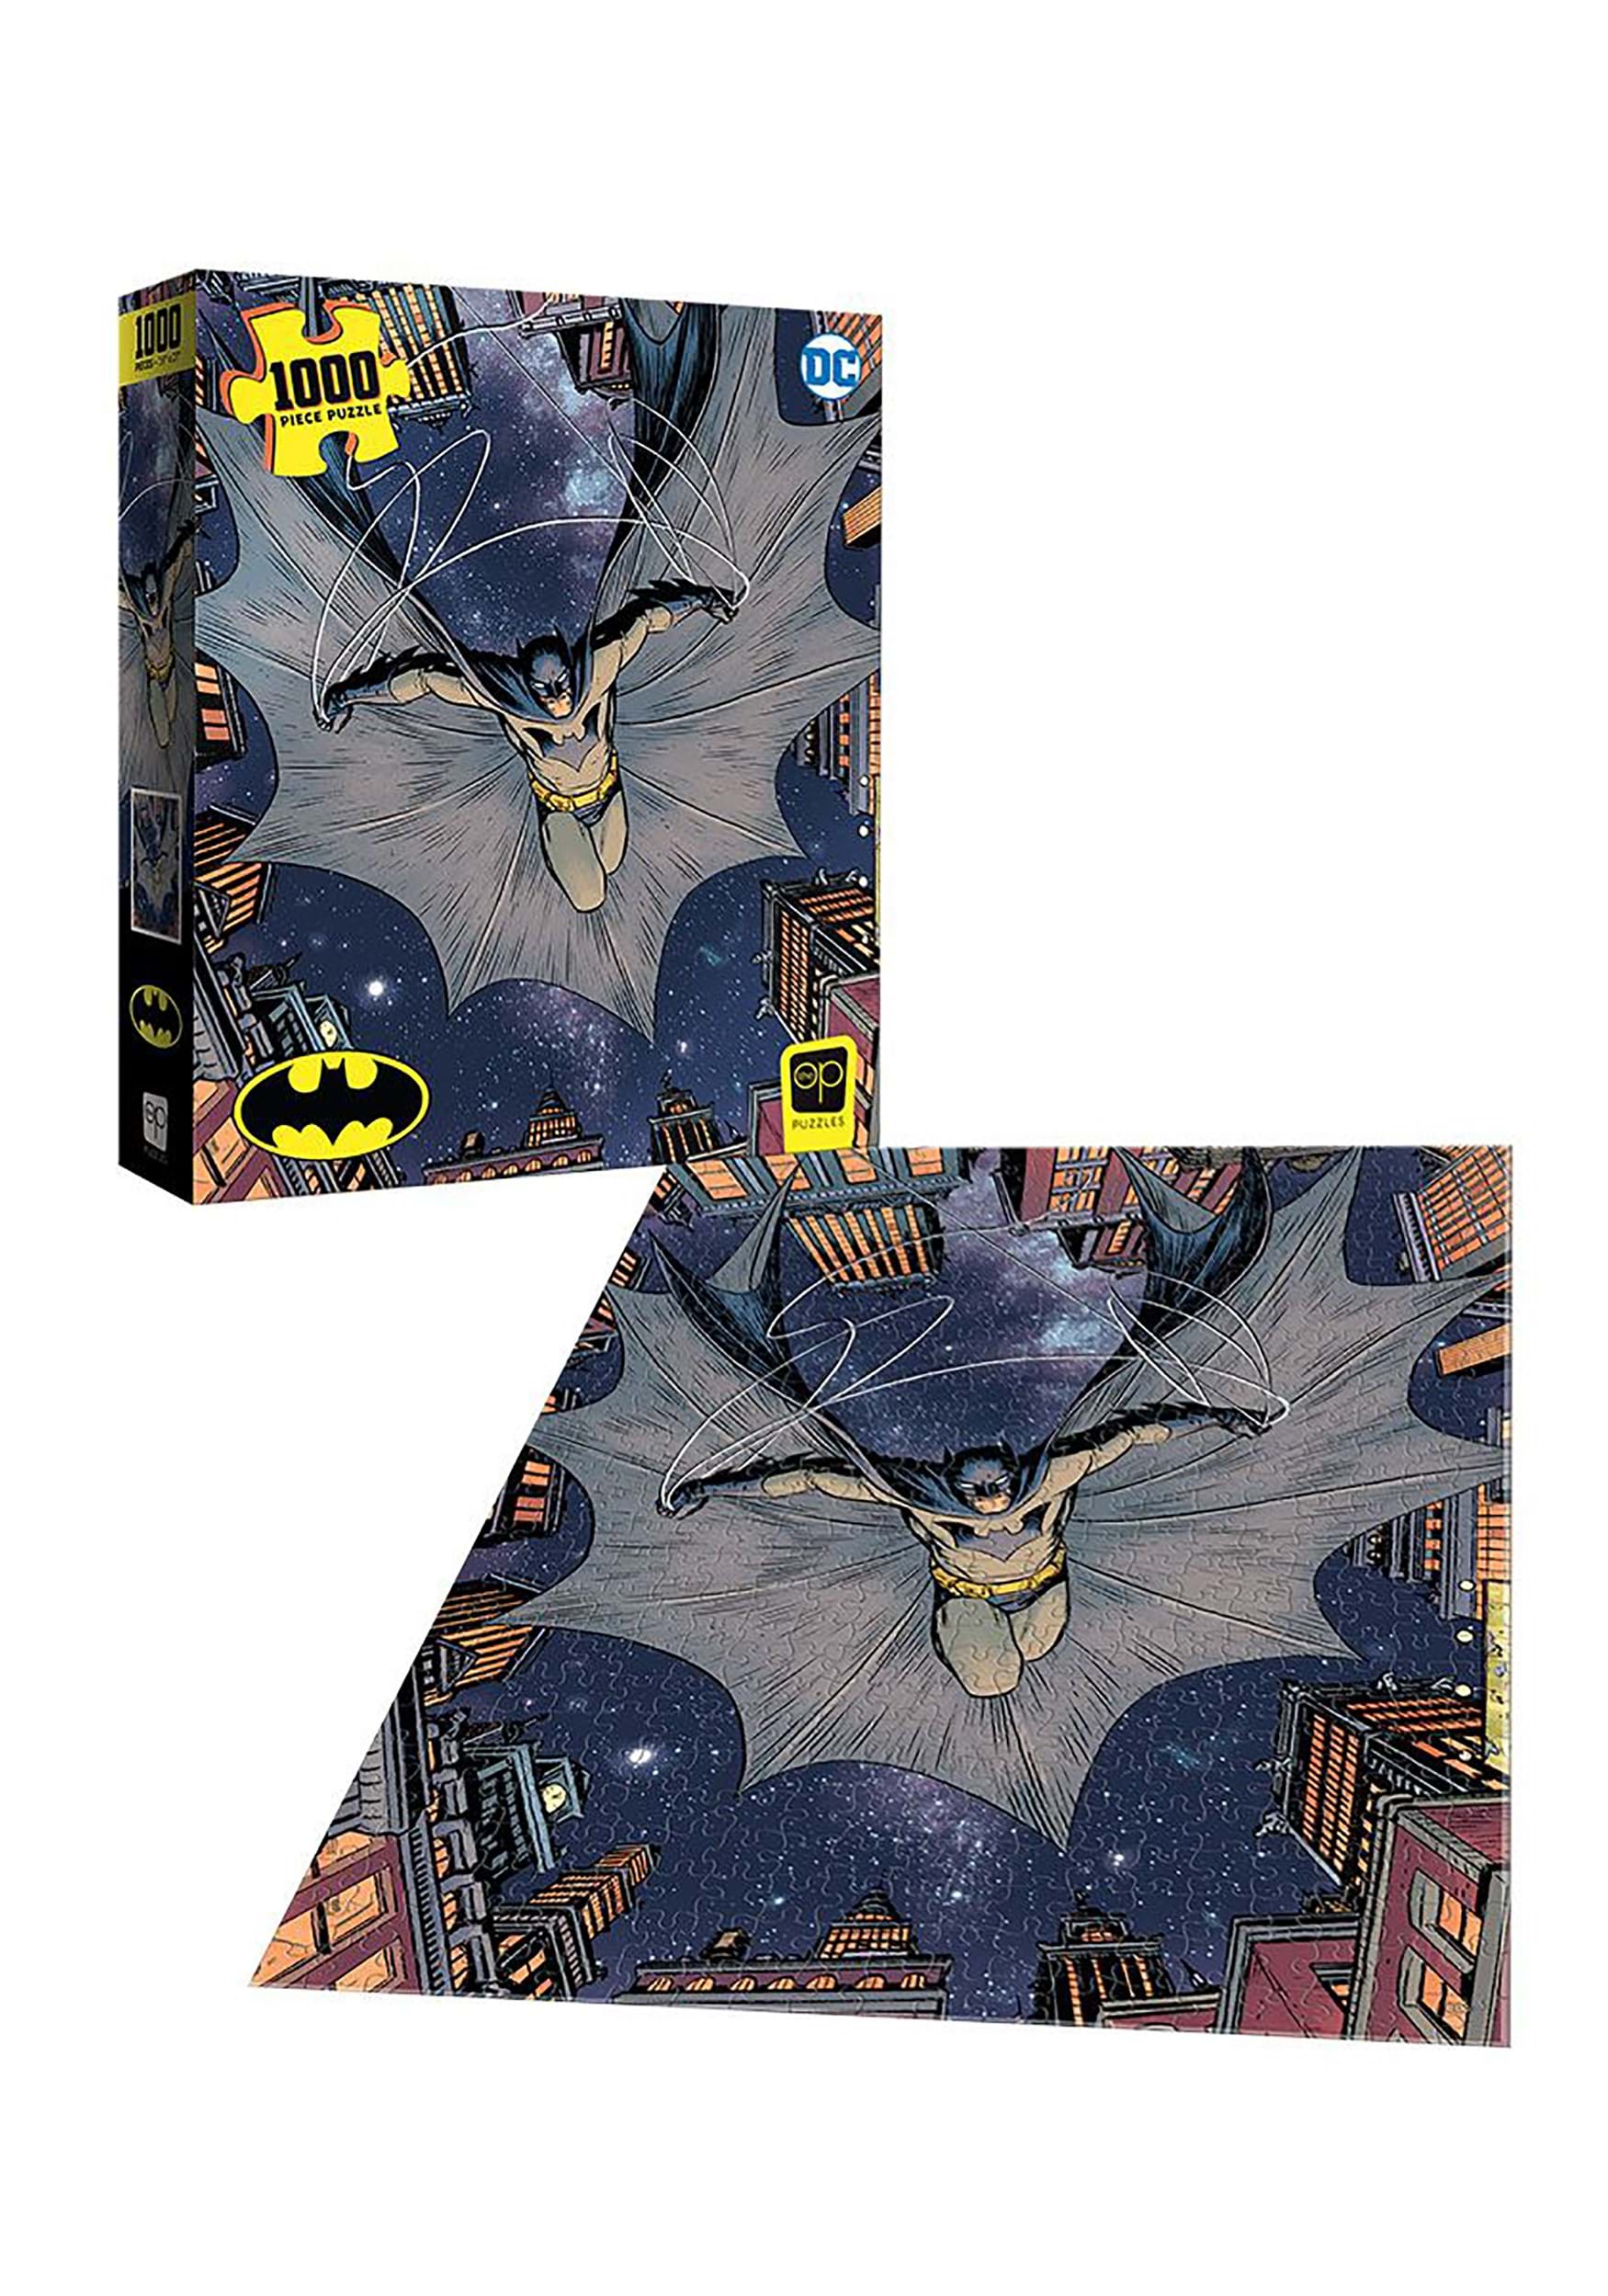 1000 Piece "I am the Night" Batman Puzzle | Superhero Collectibles and Games